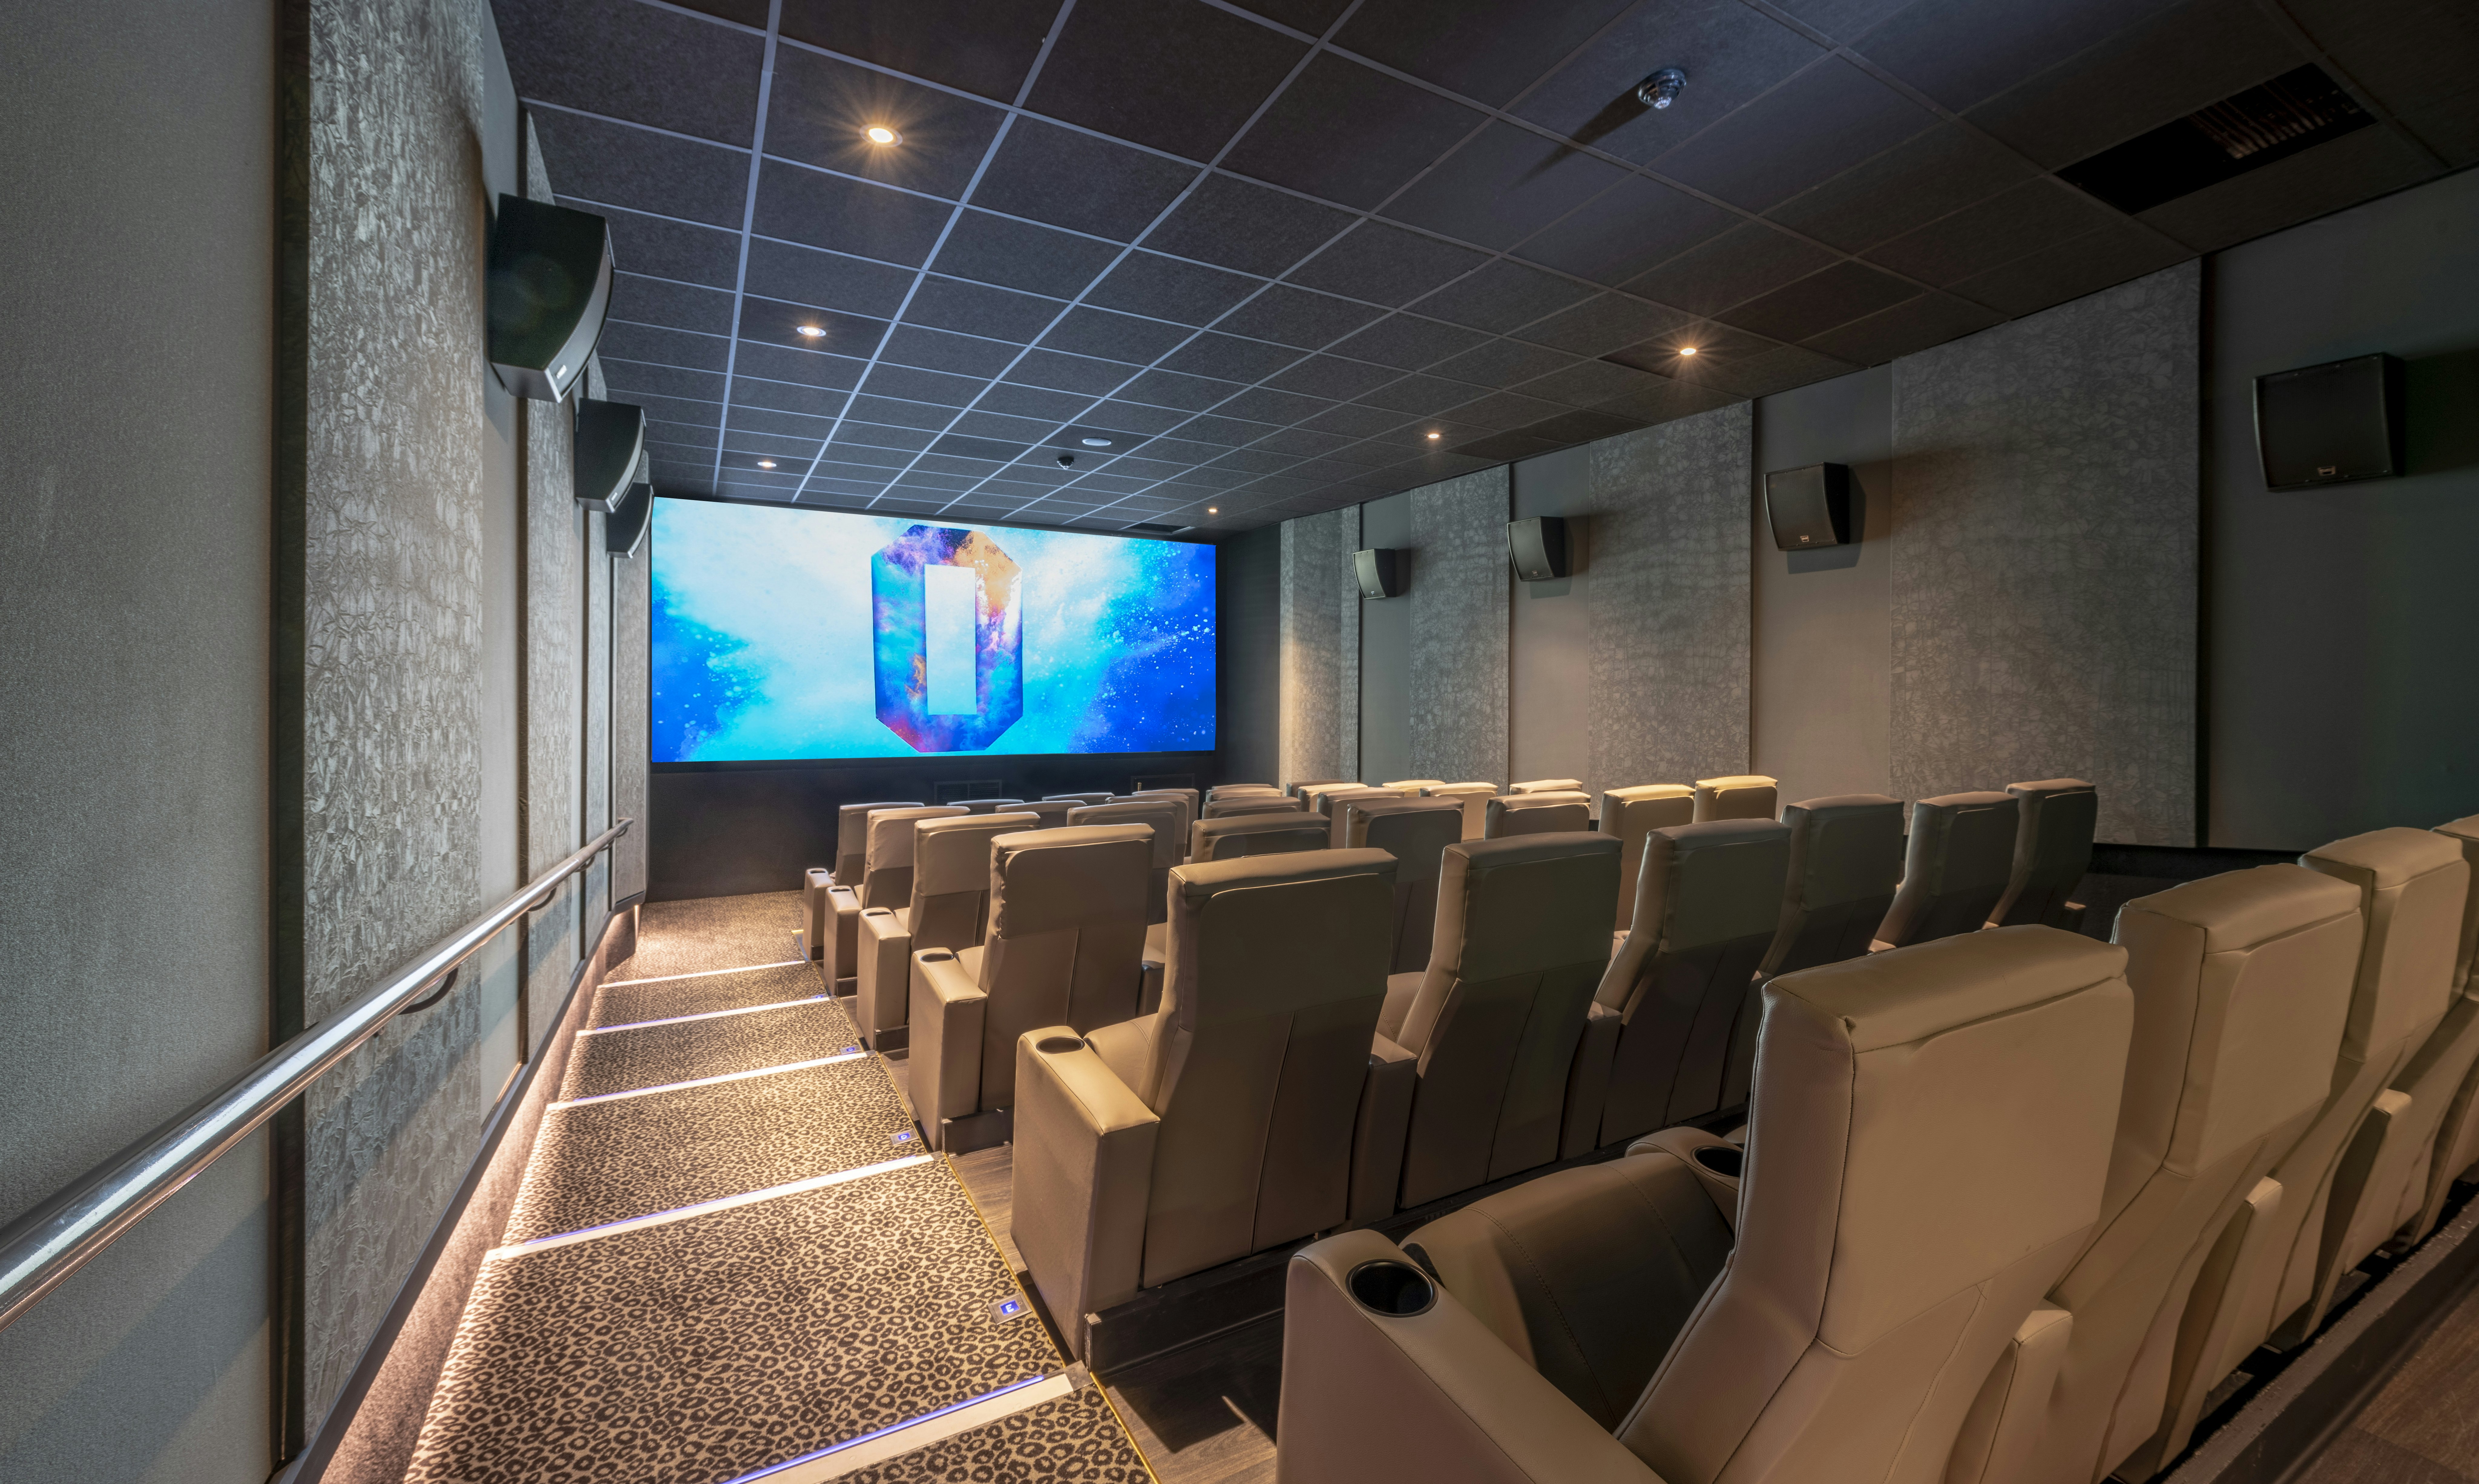 North West London Venue Hire - ODEON LUXE Leicester Square  